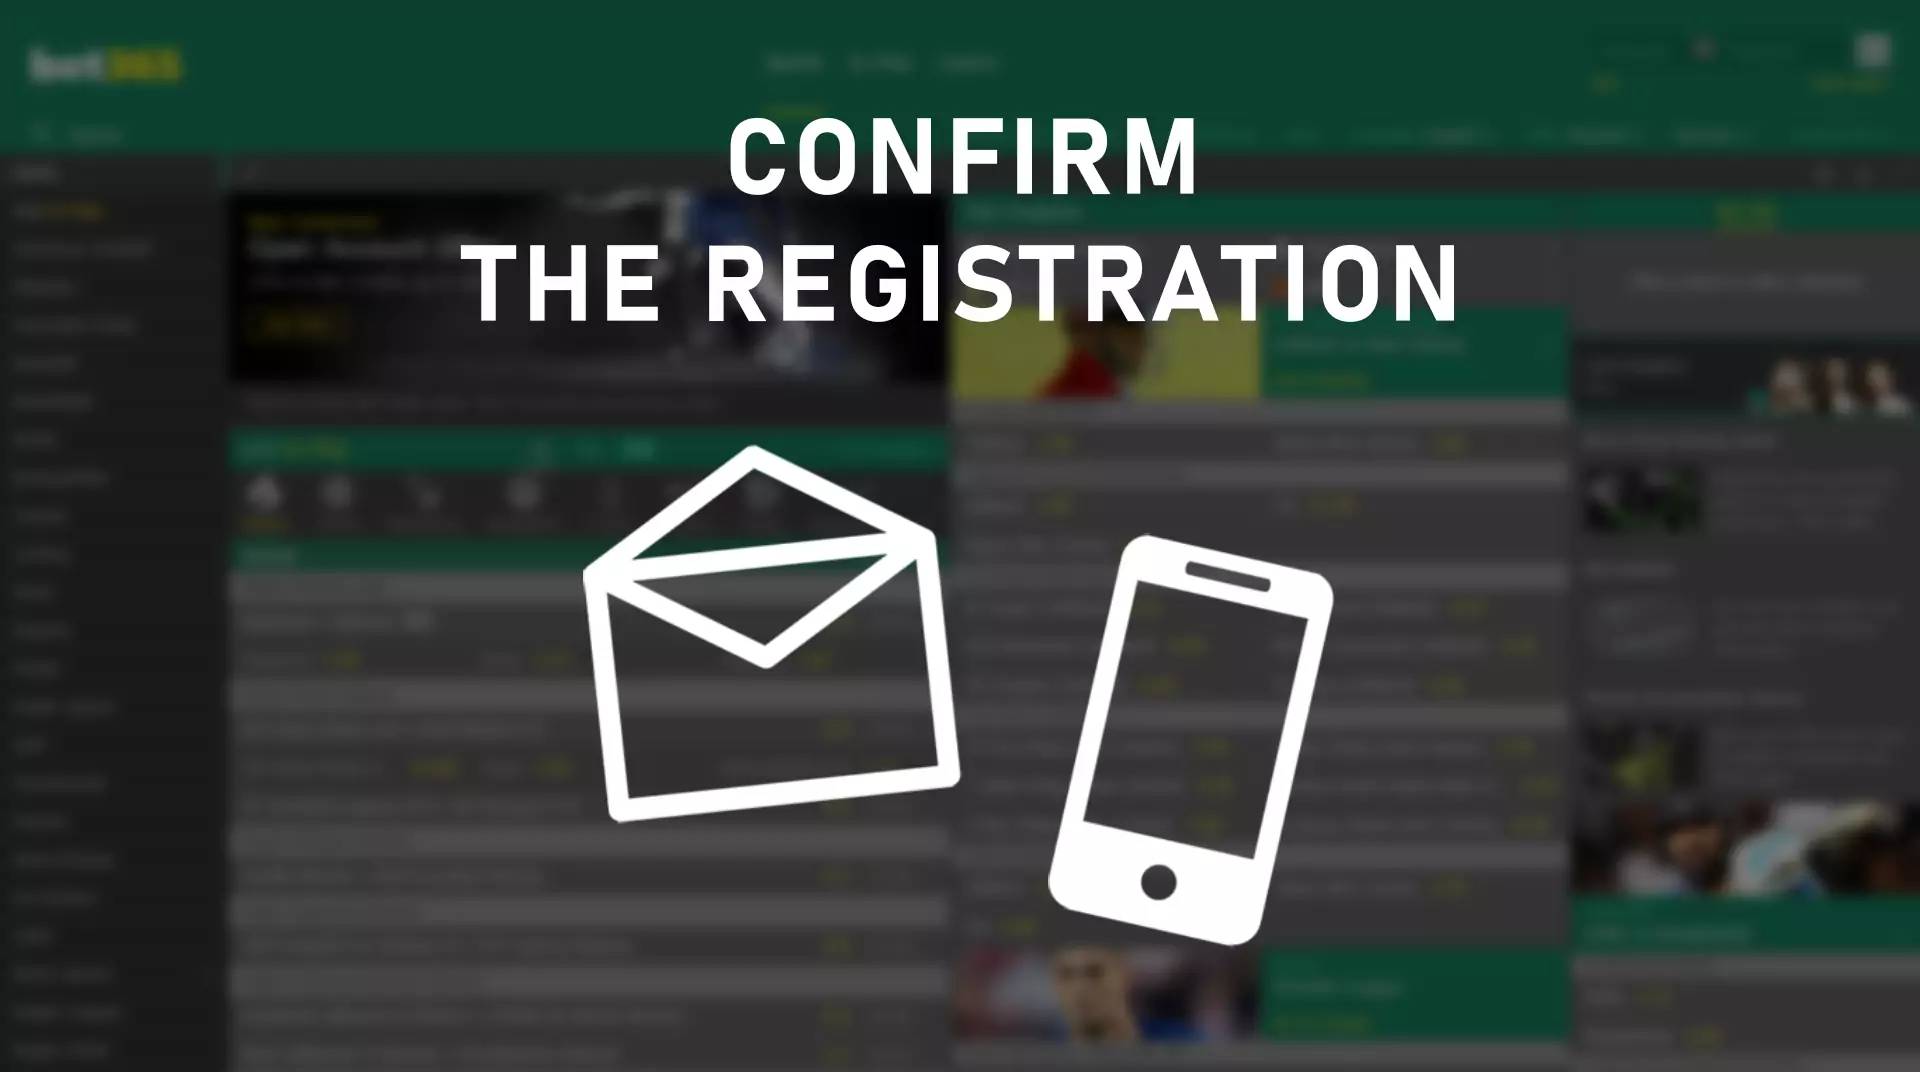 Confirm the registration process using the e-mail letter.